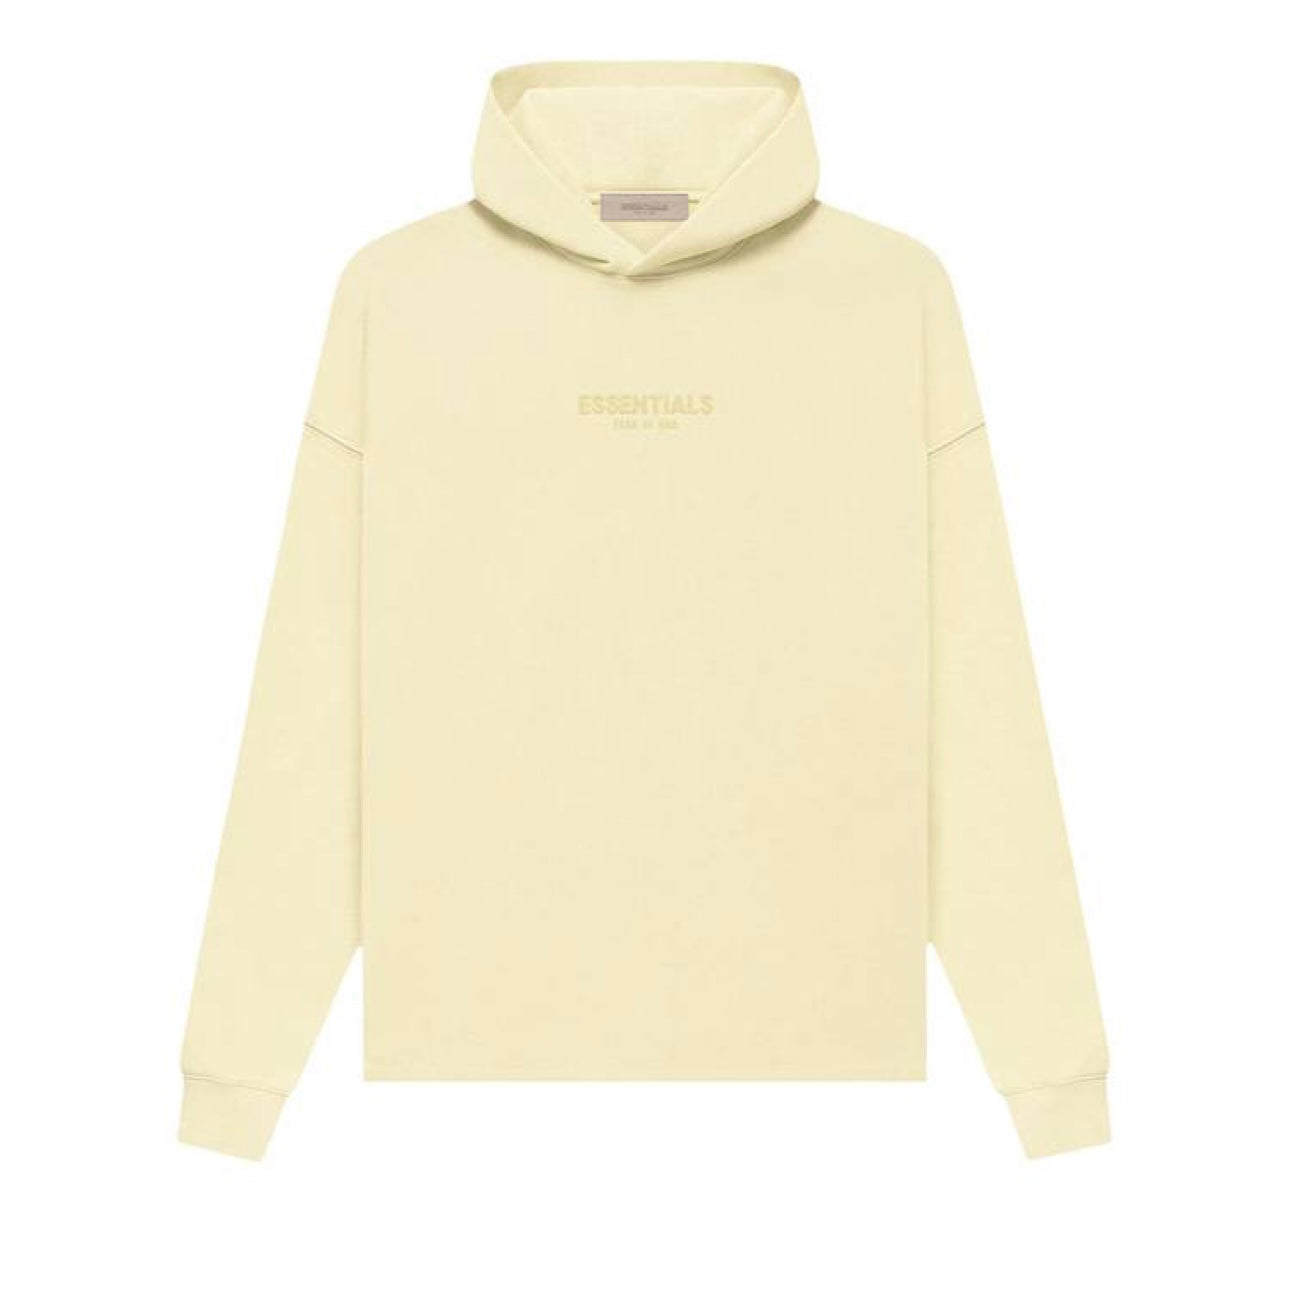 Fear of God Essentials Relaxed Hoodie “Canary”